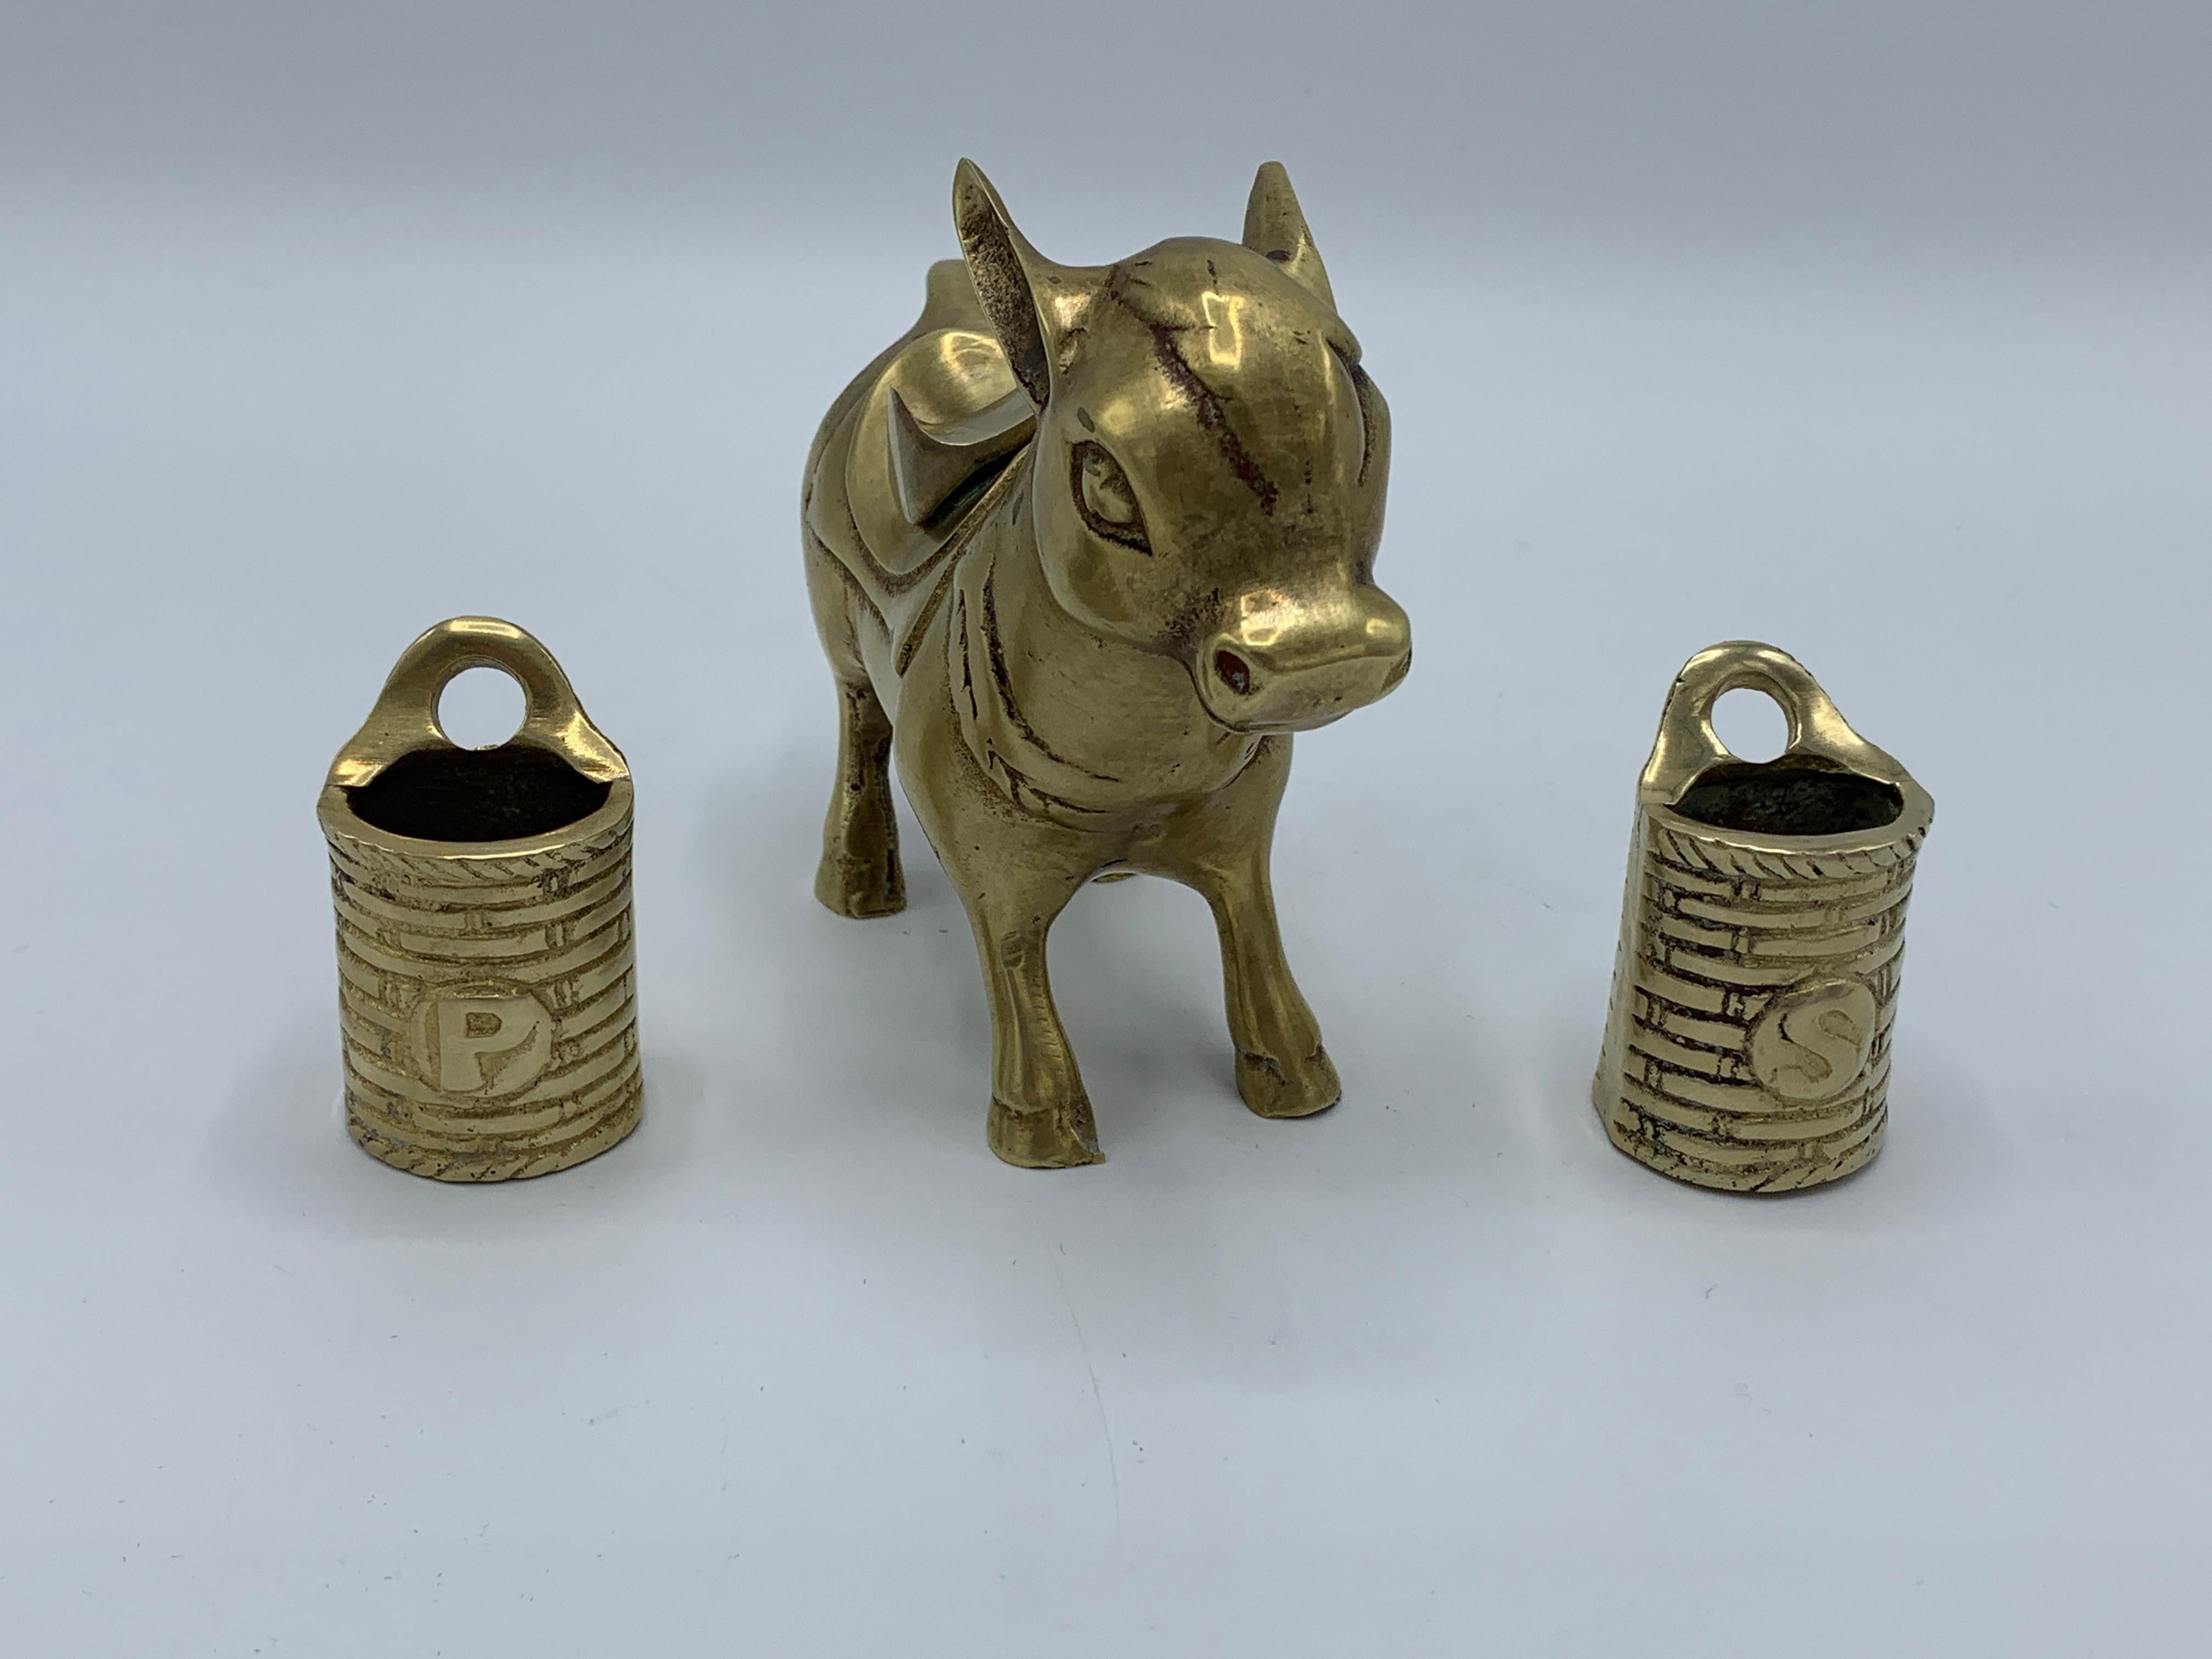 1960s Brass Mule with Saddle Bag Salt and Pepper Shaker Set 2